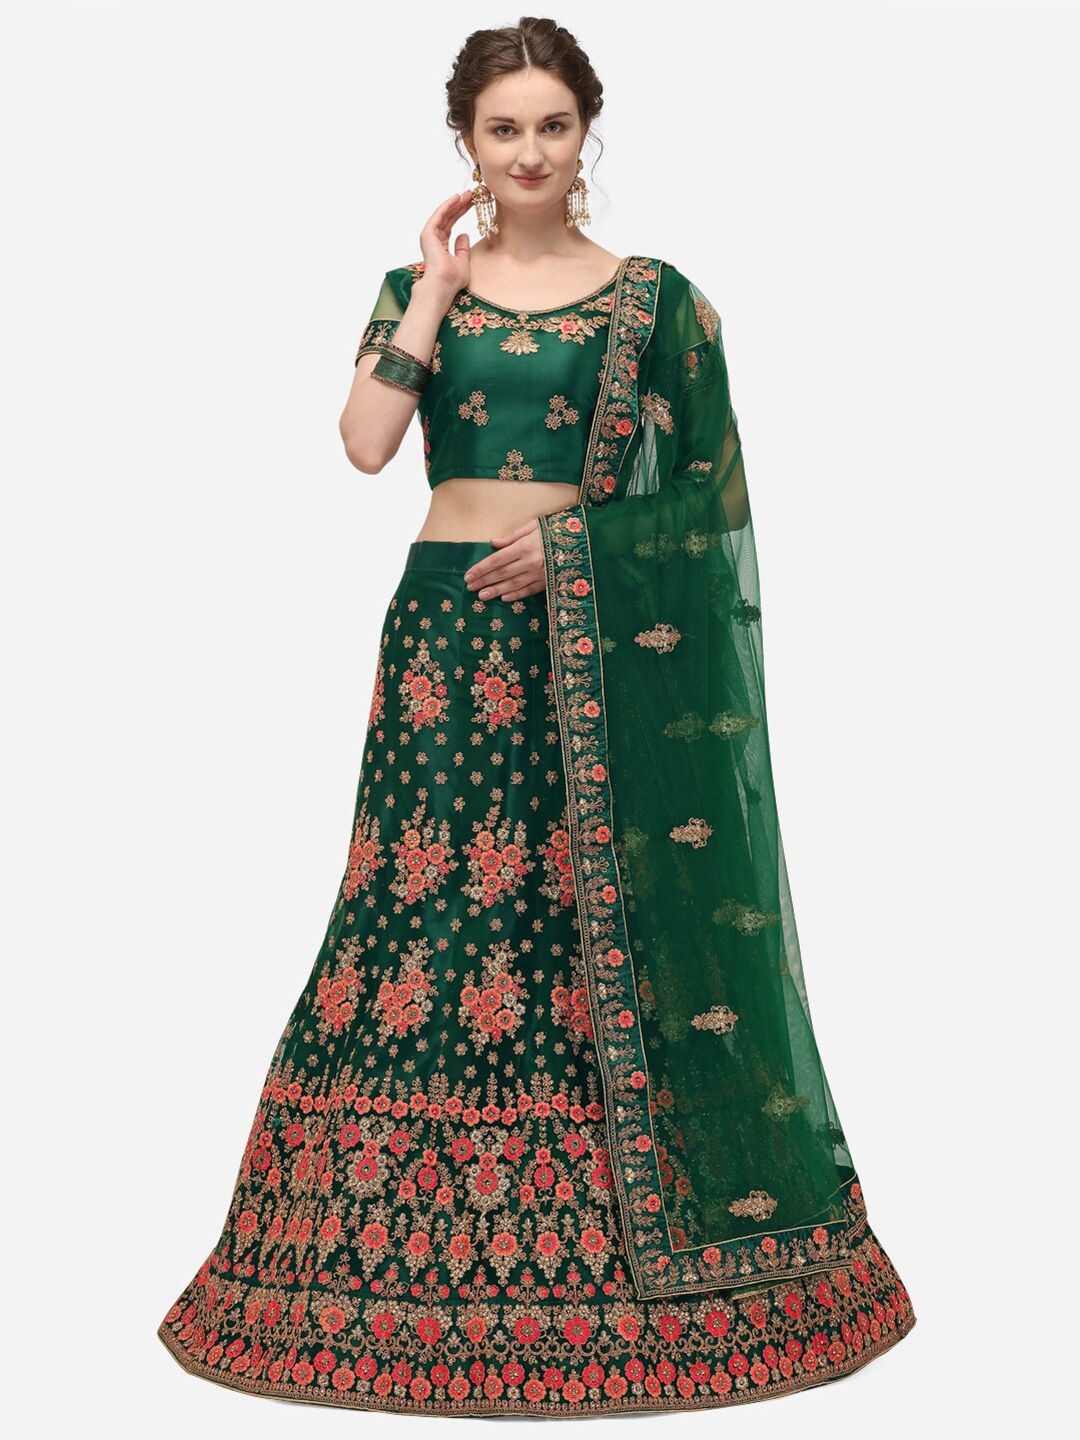 Netram Green & Pink Embroidered Zardozi Semi-Stitched Lehenga & Unstitched Blouse With Dupatta Price in India